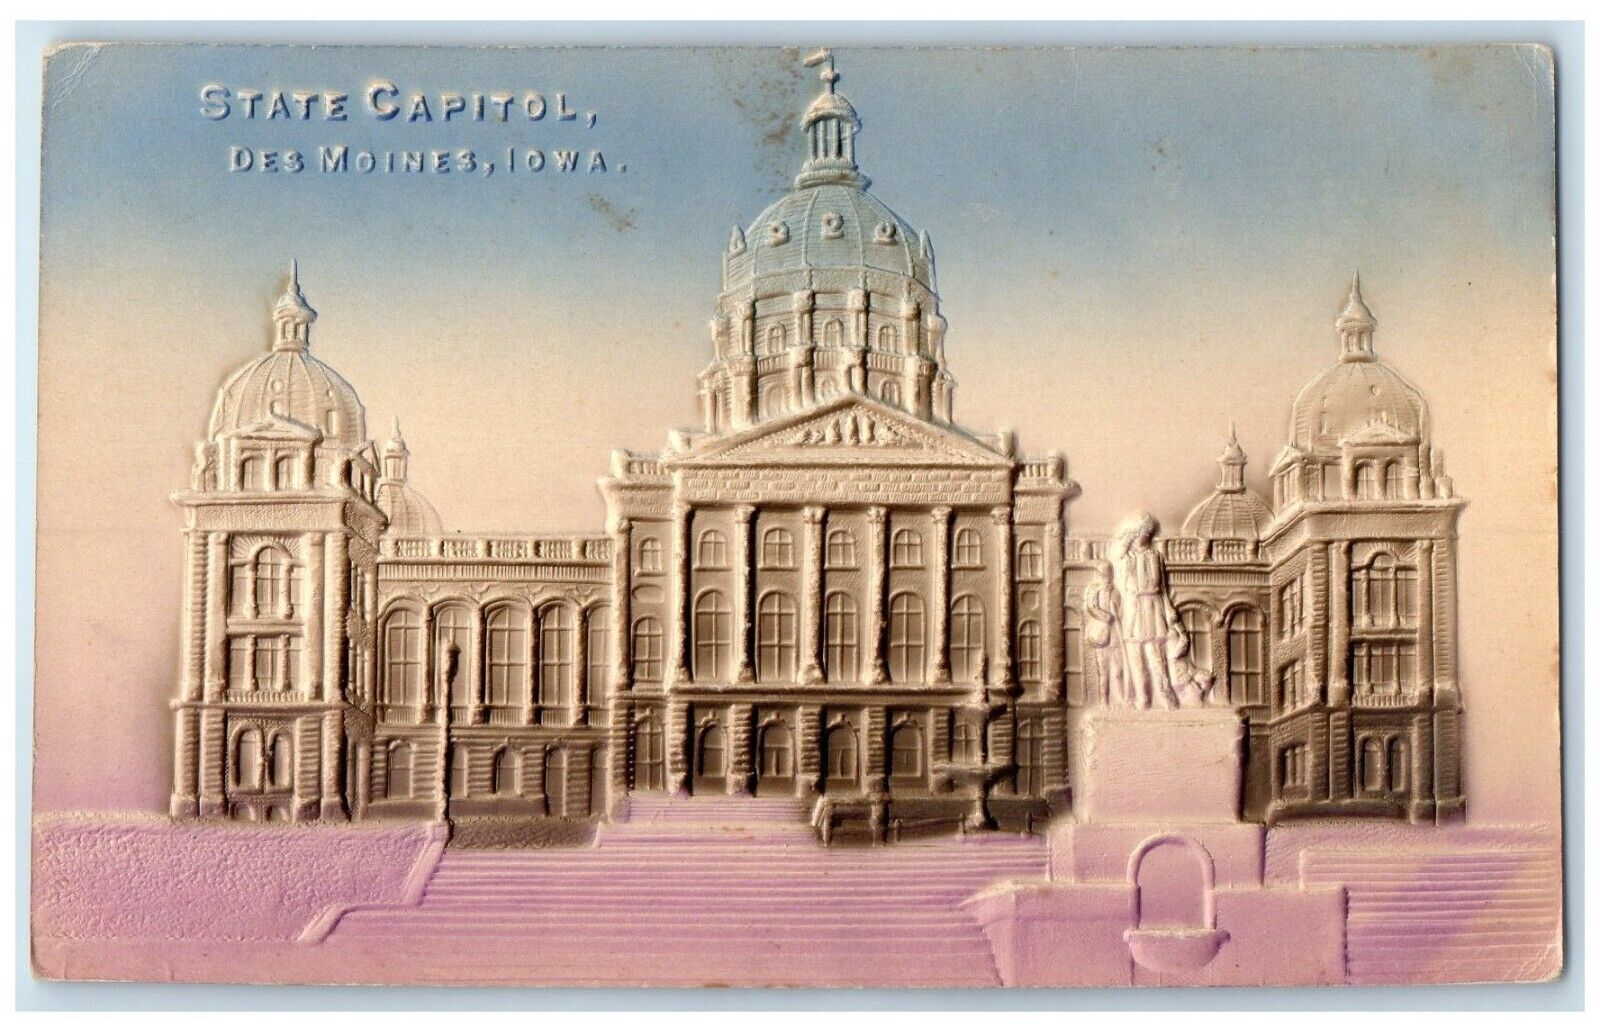 c1910 State Capitol Exterior Des Moines Iowa Embossed Airbrush Vintage Postcard